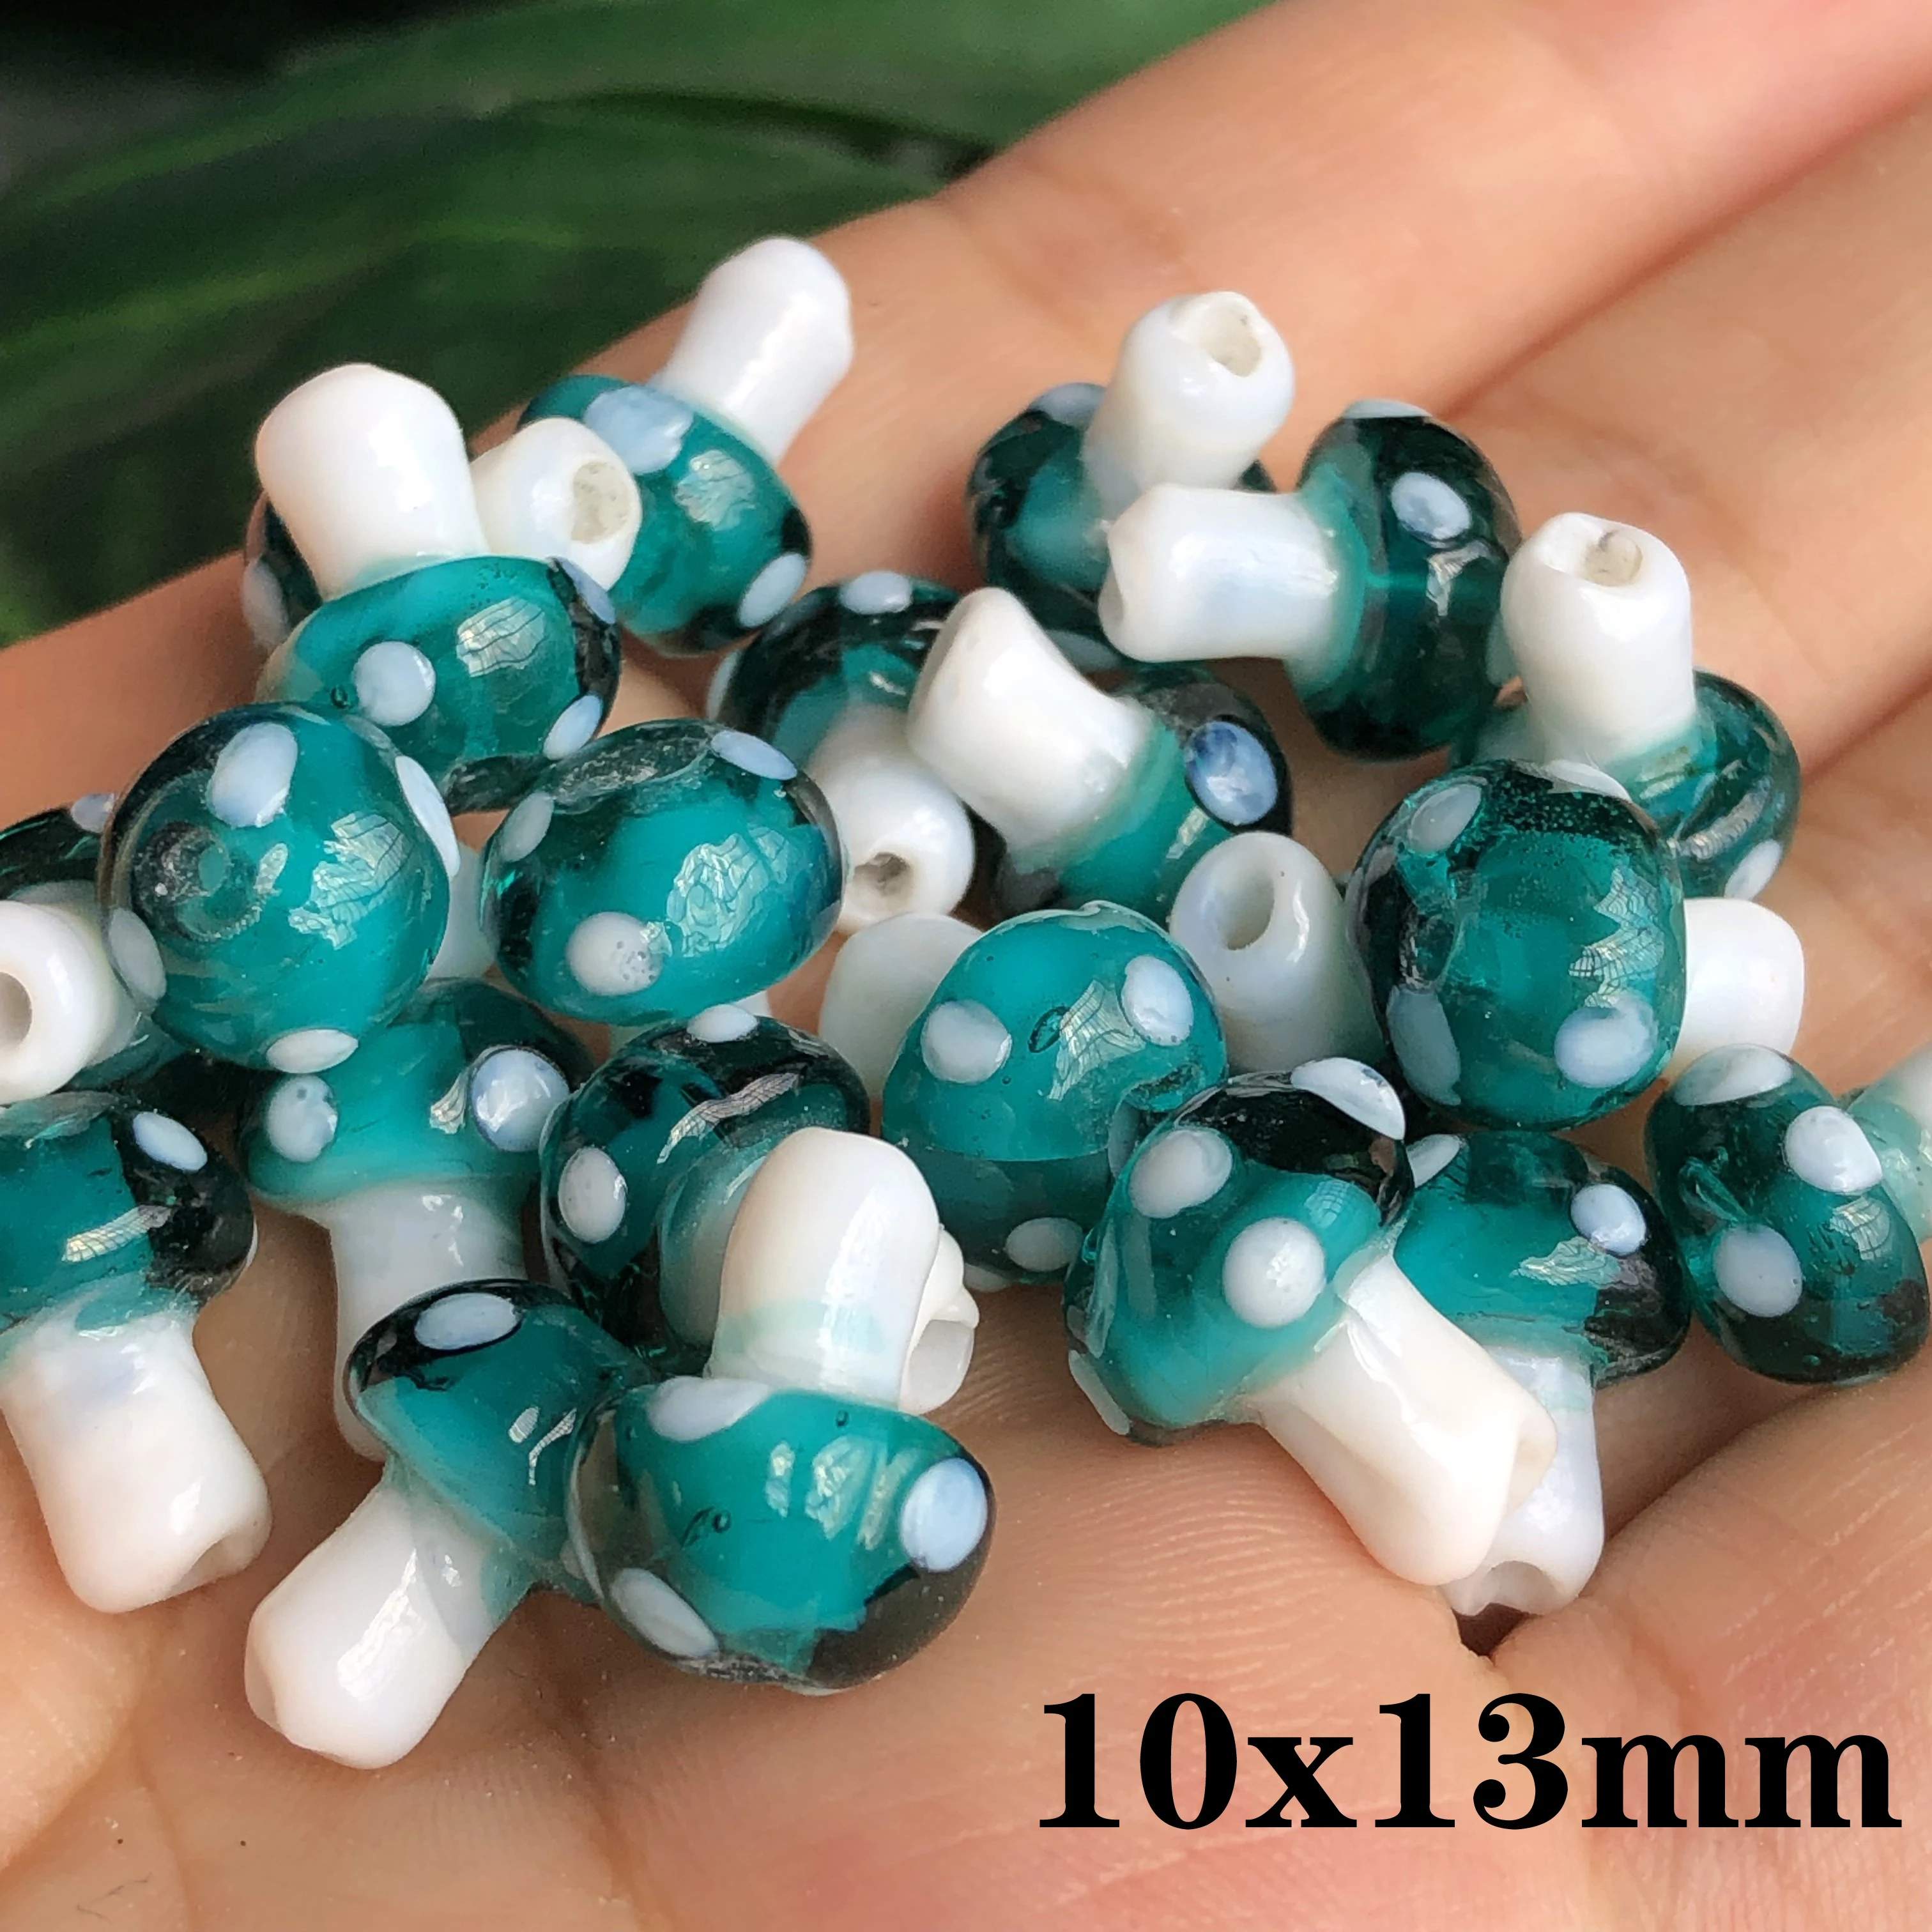 10x13mm 5pcs Colour Mushroom beads Glass Loose Spacer Bead for Jewelry  Making DIY Bracelets Necklace Earrings Accessories NEW - AliExpress